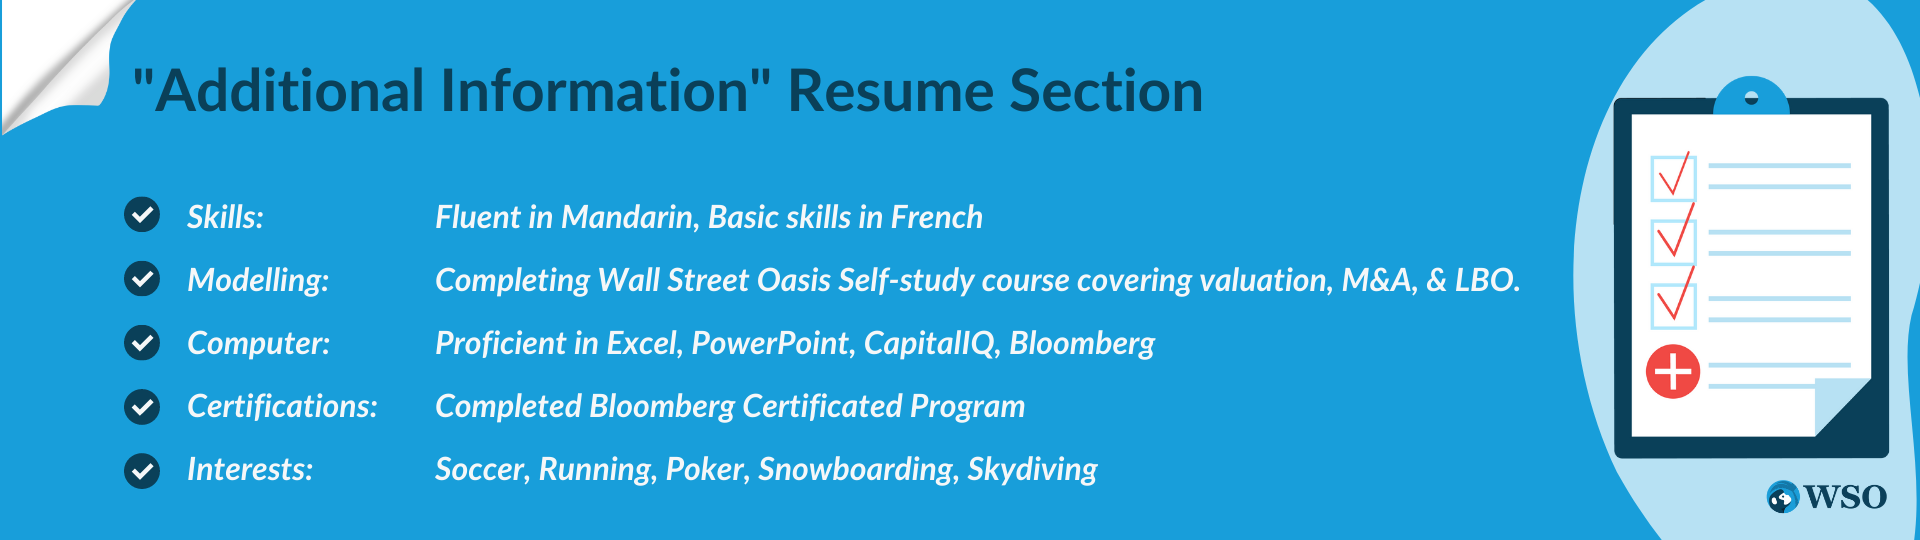 Additional Information Resume Section